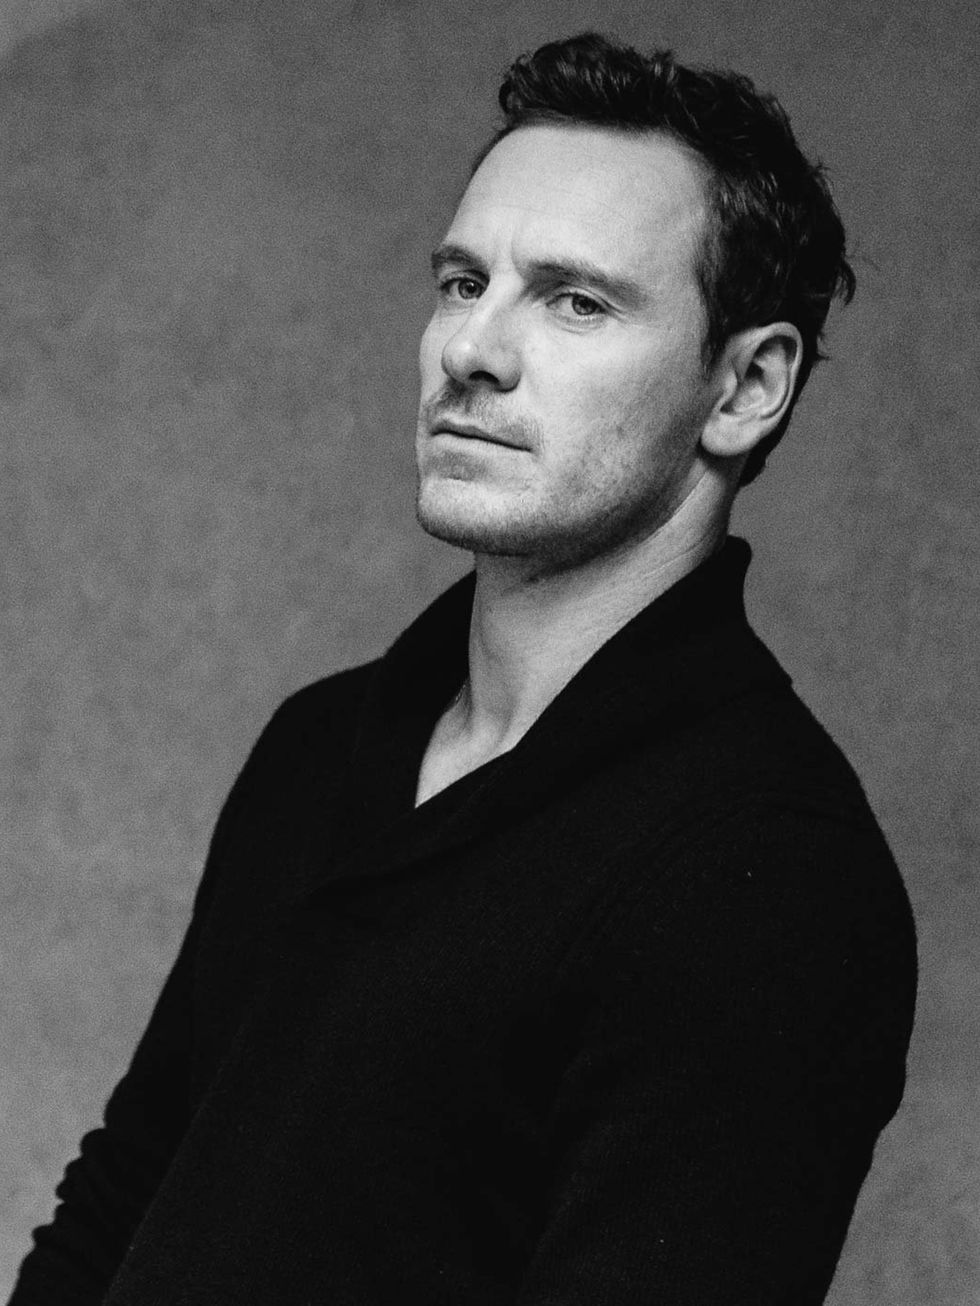 <p>It's all in the eyes with <a href="http://www.elleuk.com/star-style/news/michael-fassbender-david-bailey-armani-december-2013-cover">Fassbender</a></p><p><a href="http://www.elleuk.com/star-style/celebrity-style-files/michael-fassbender-elle-man-of-the